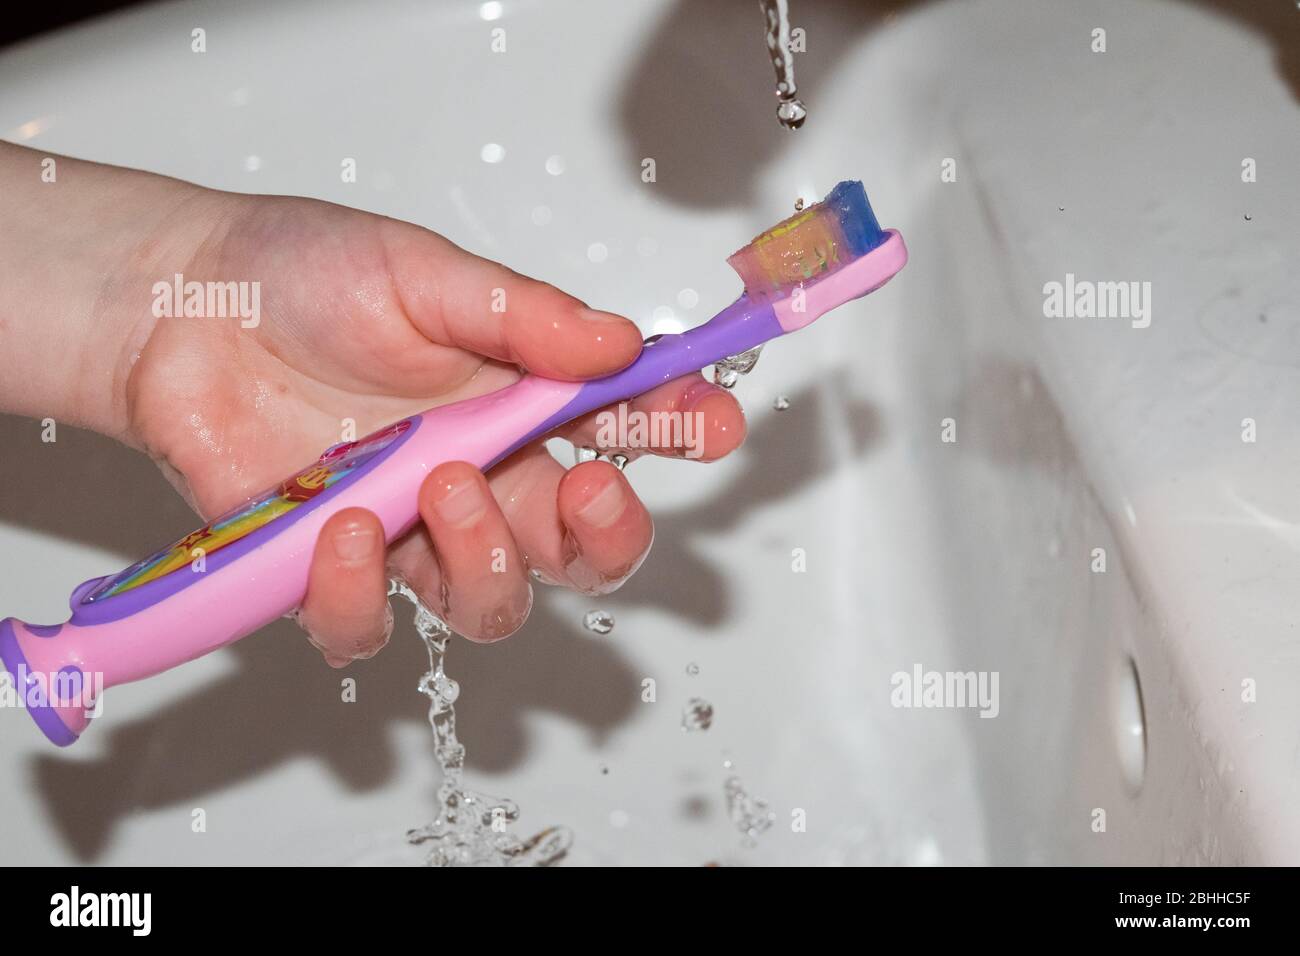 Child holding toothbrush under tap Stock Photo